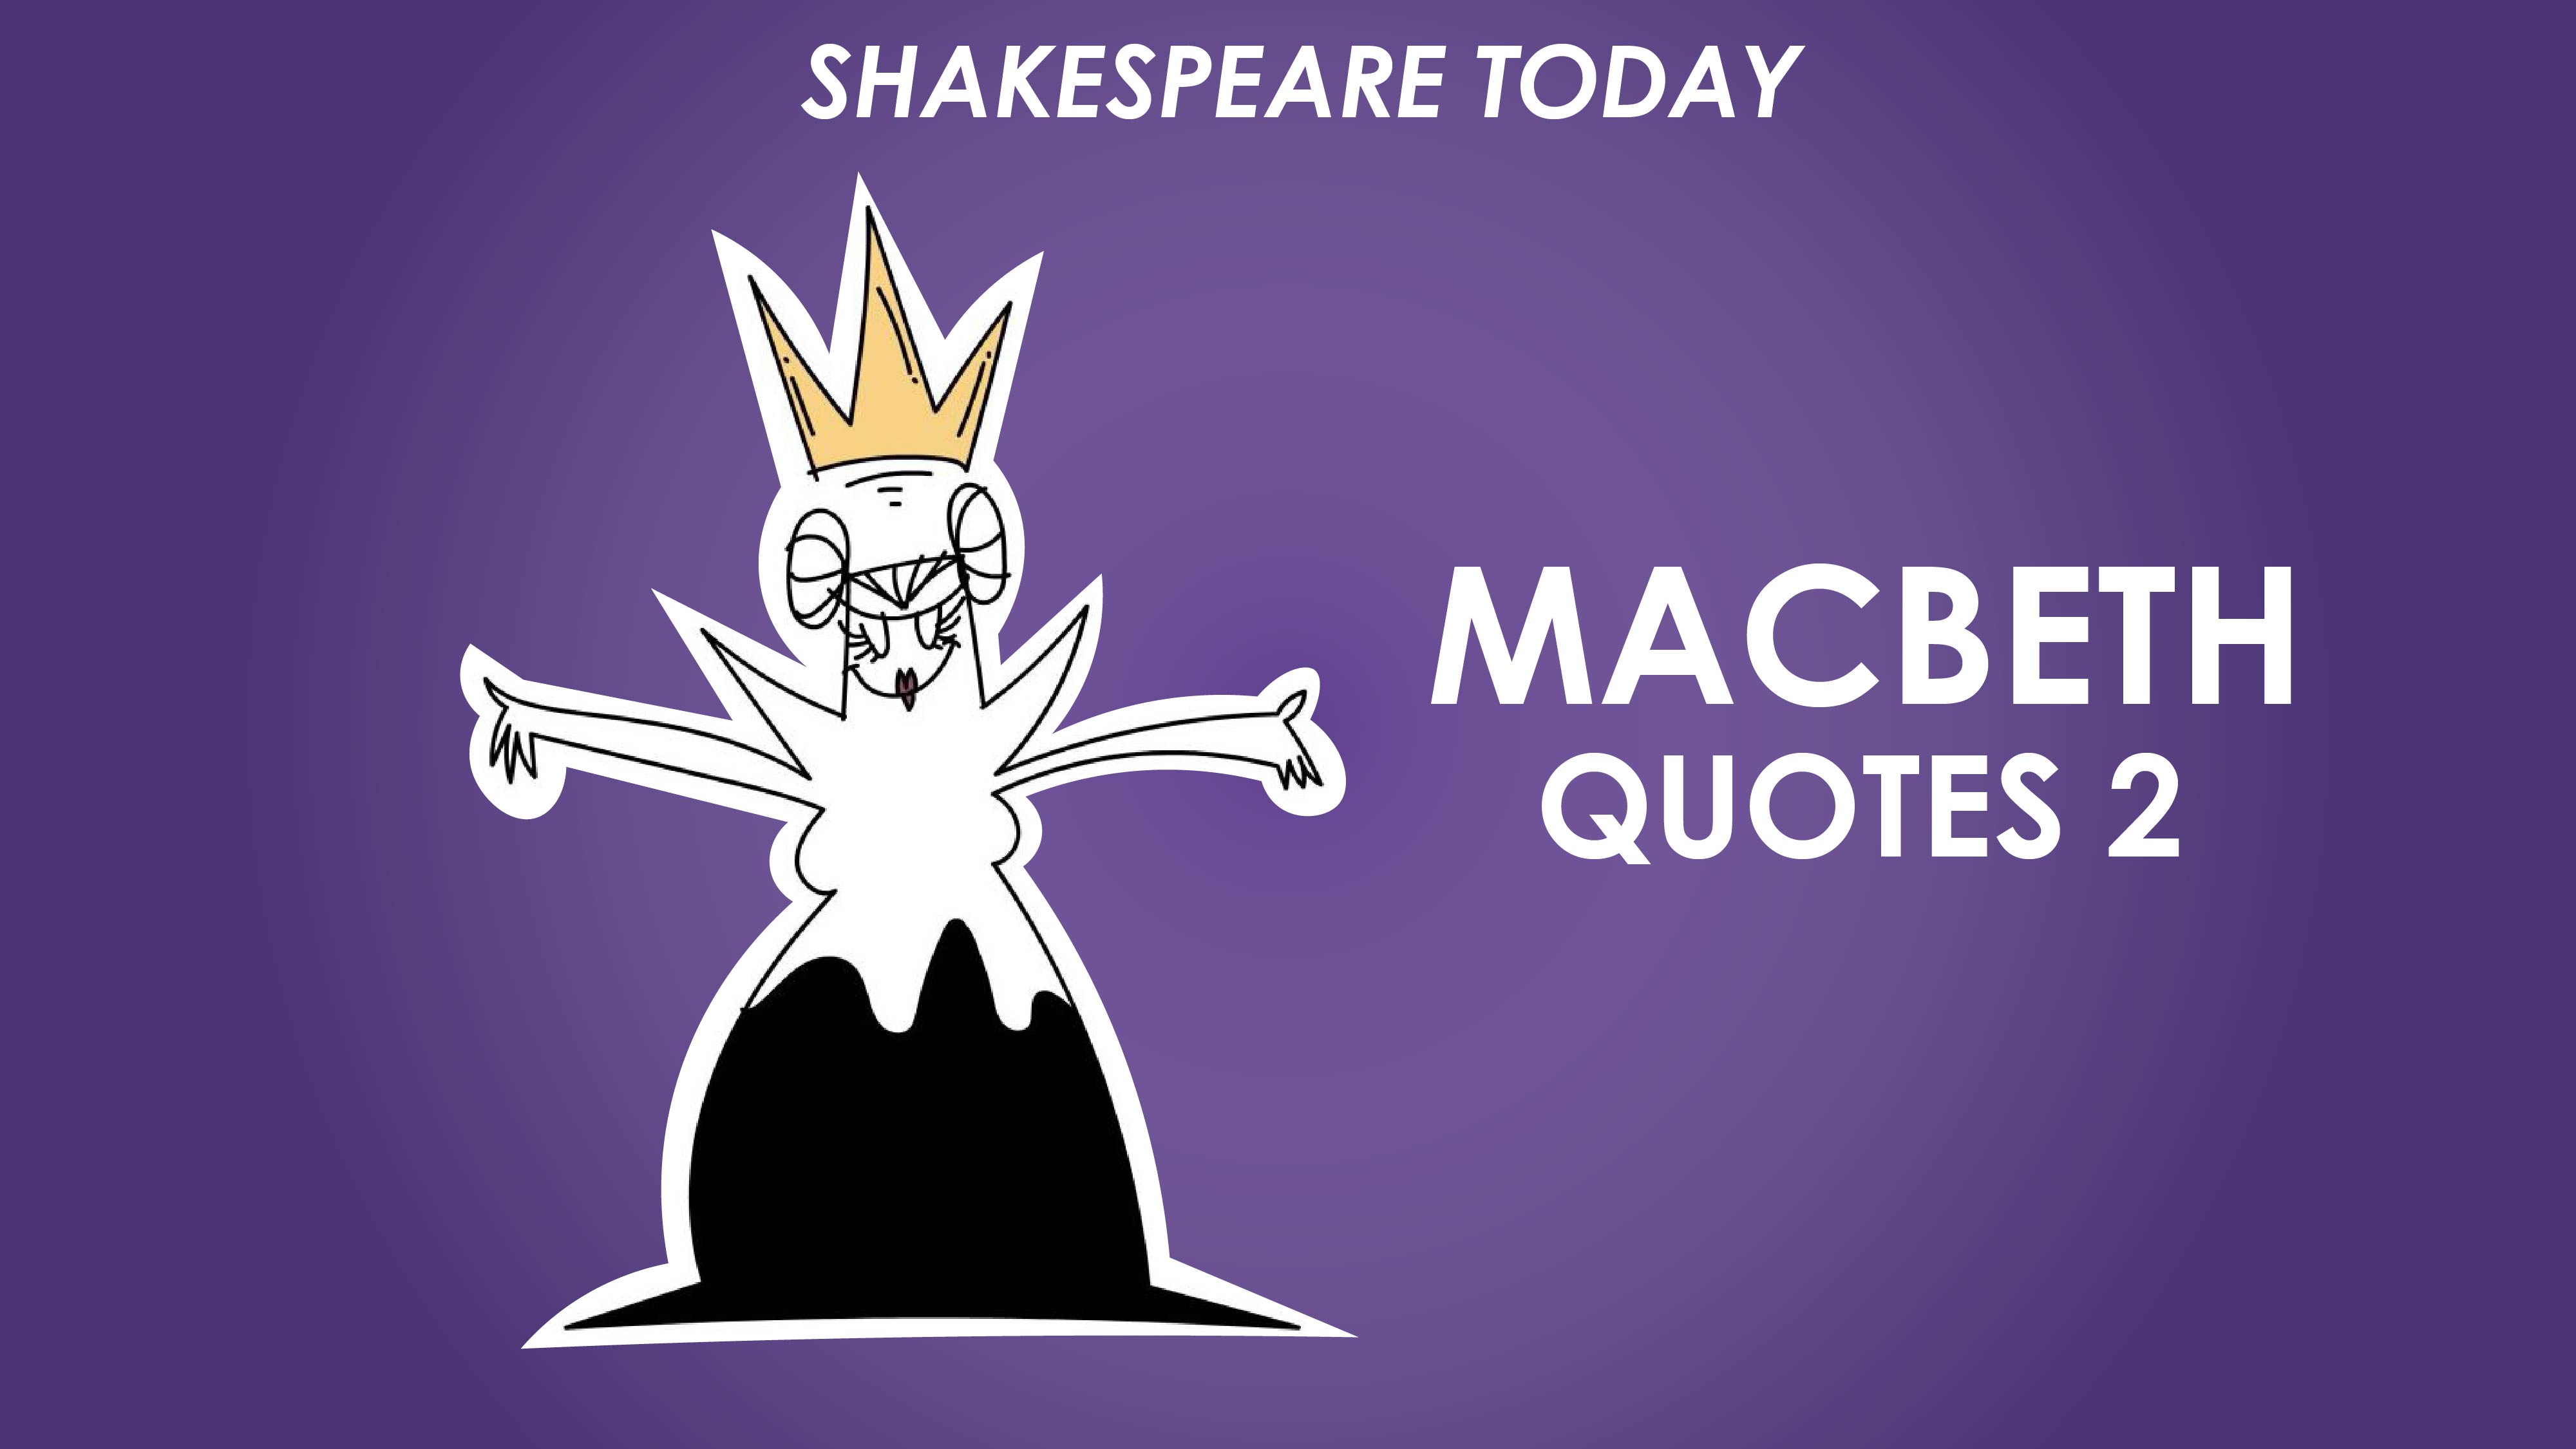 Macbeth Key Quotes Analysis Part 2 - Shakespeare Today Series